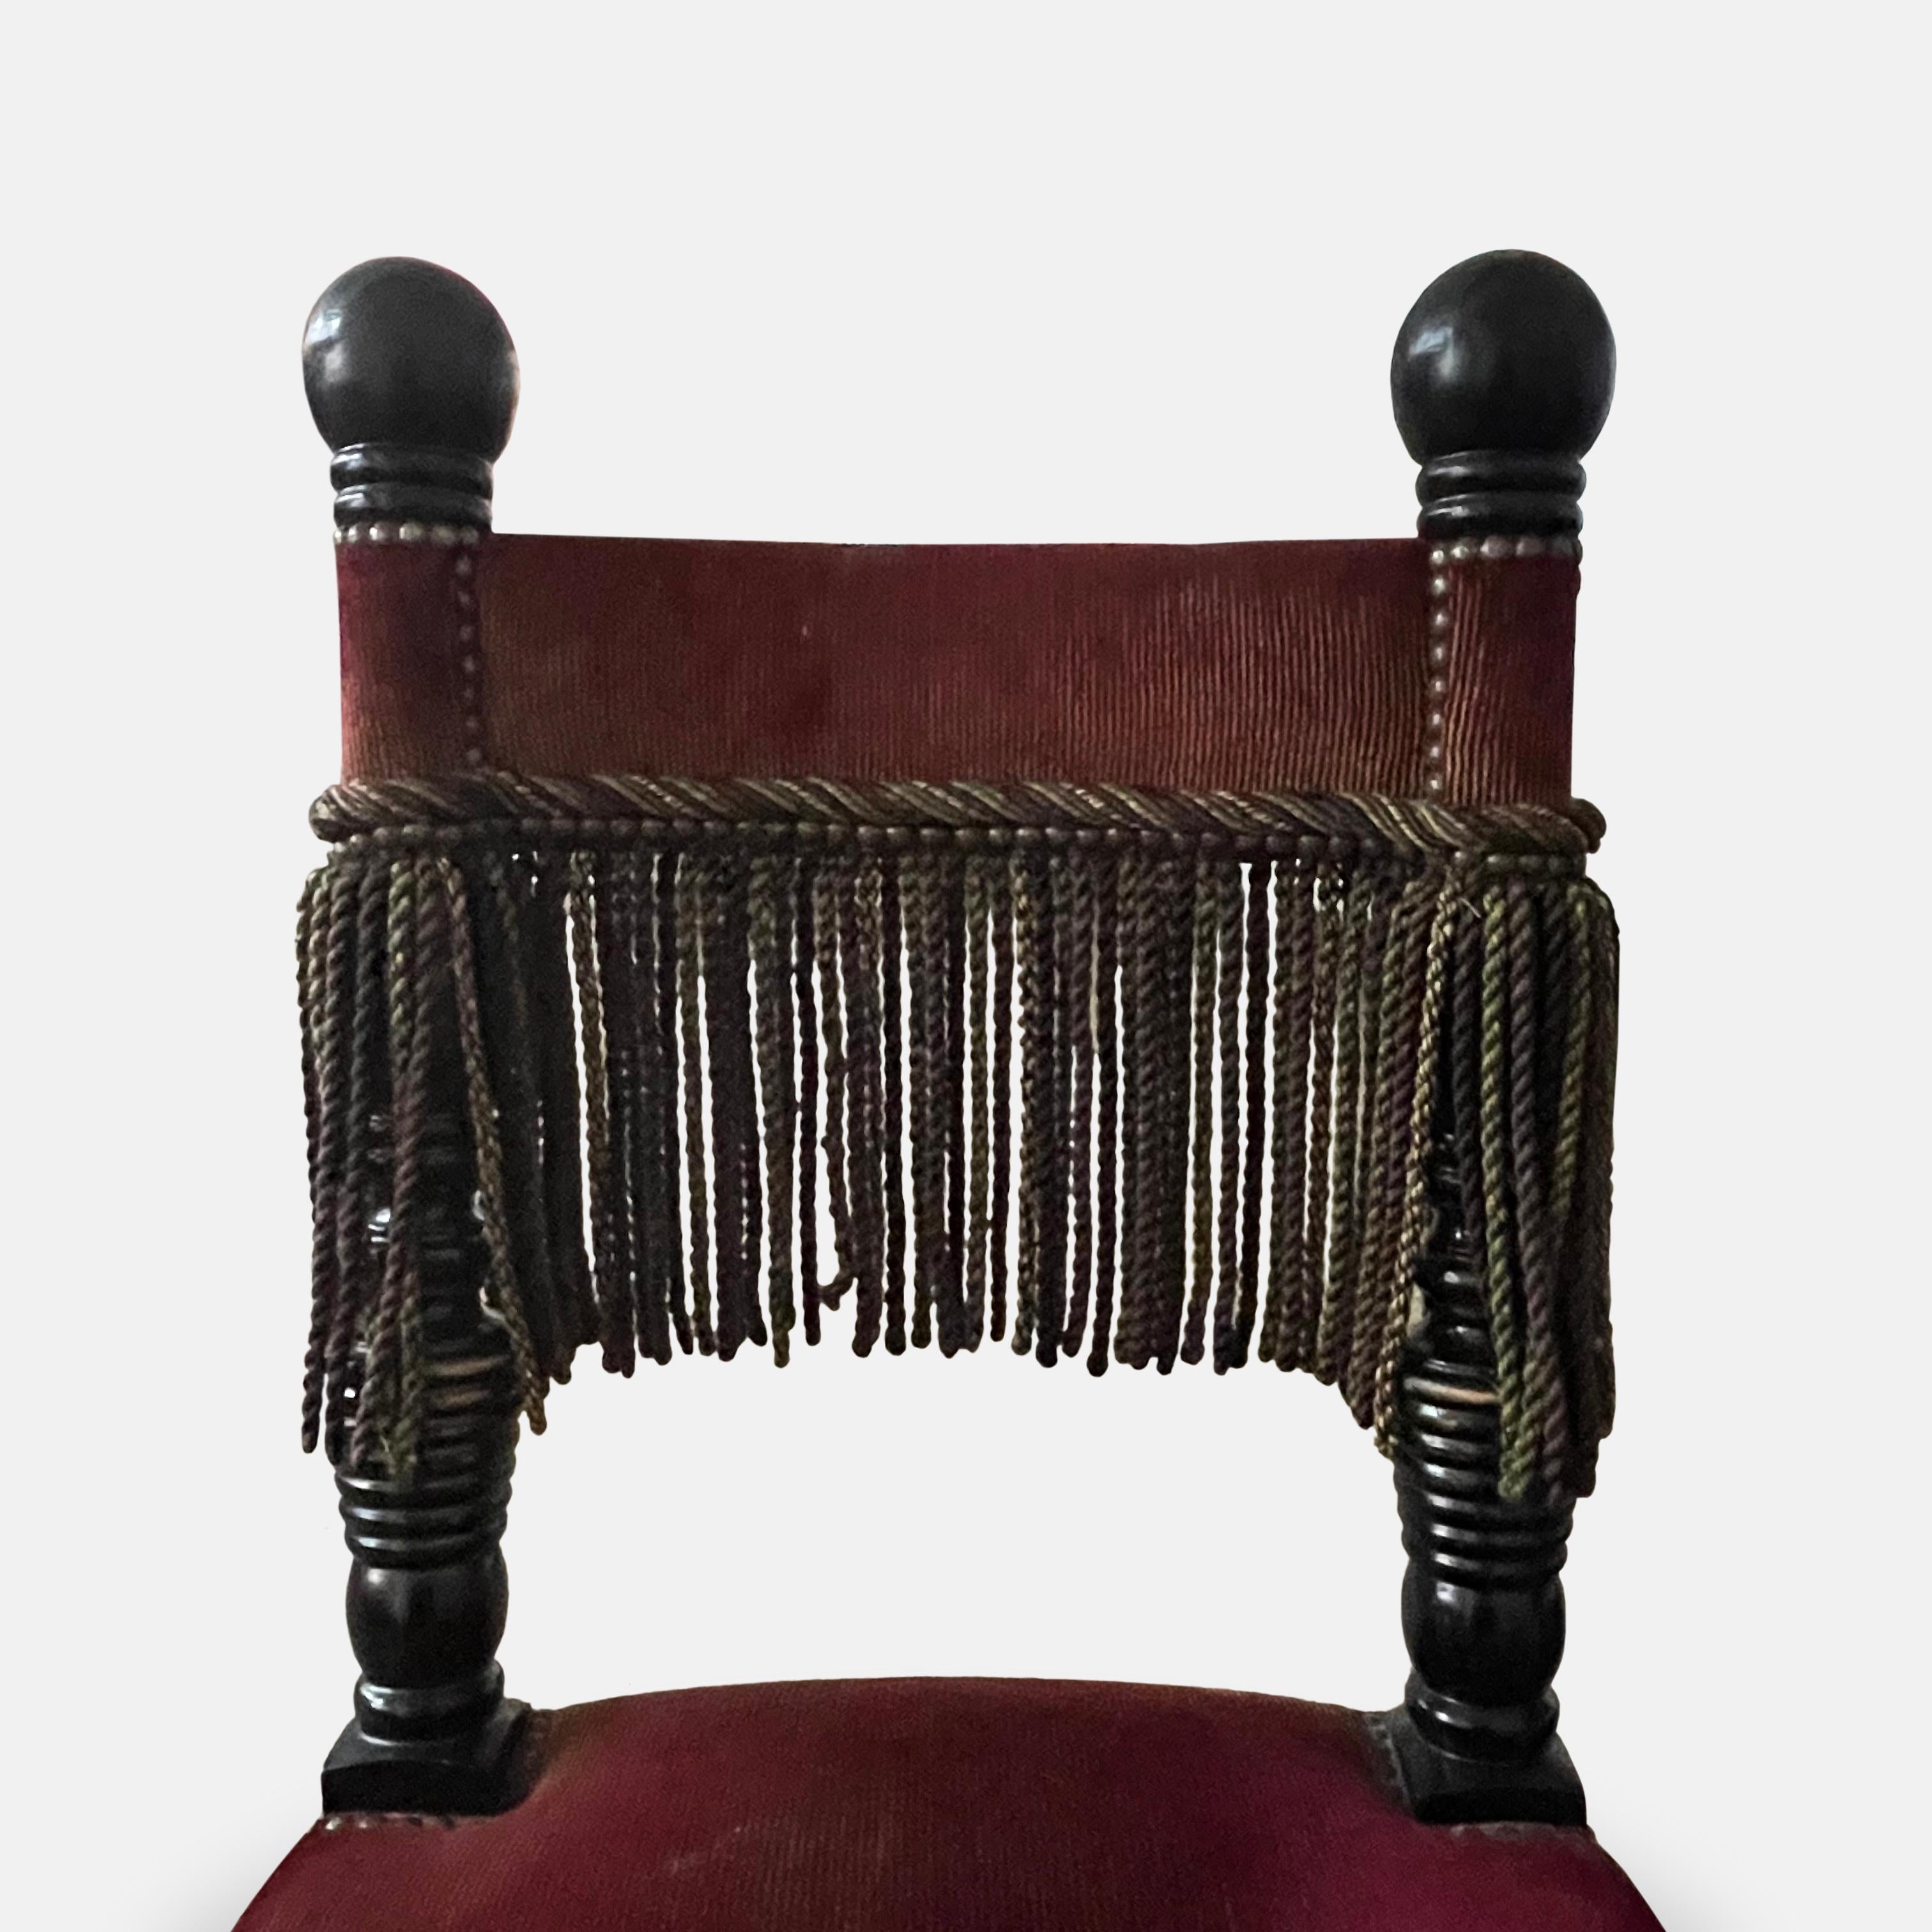 Fringed Chairs From Ladurée Patisserie For Sale 2